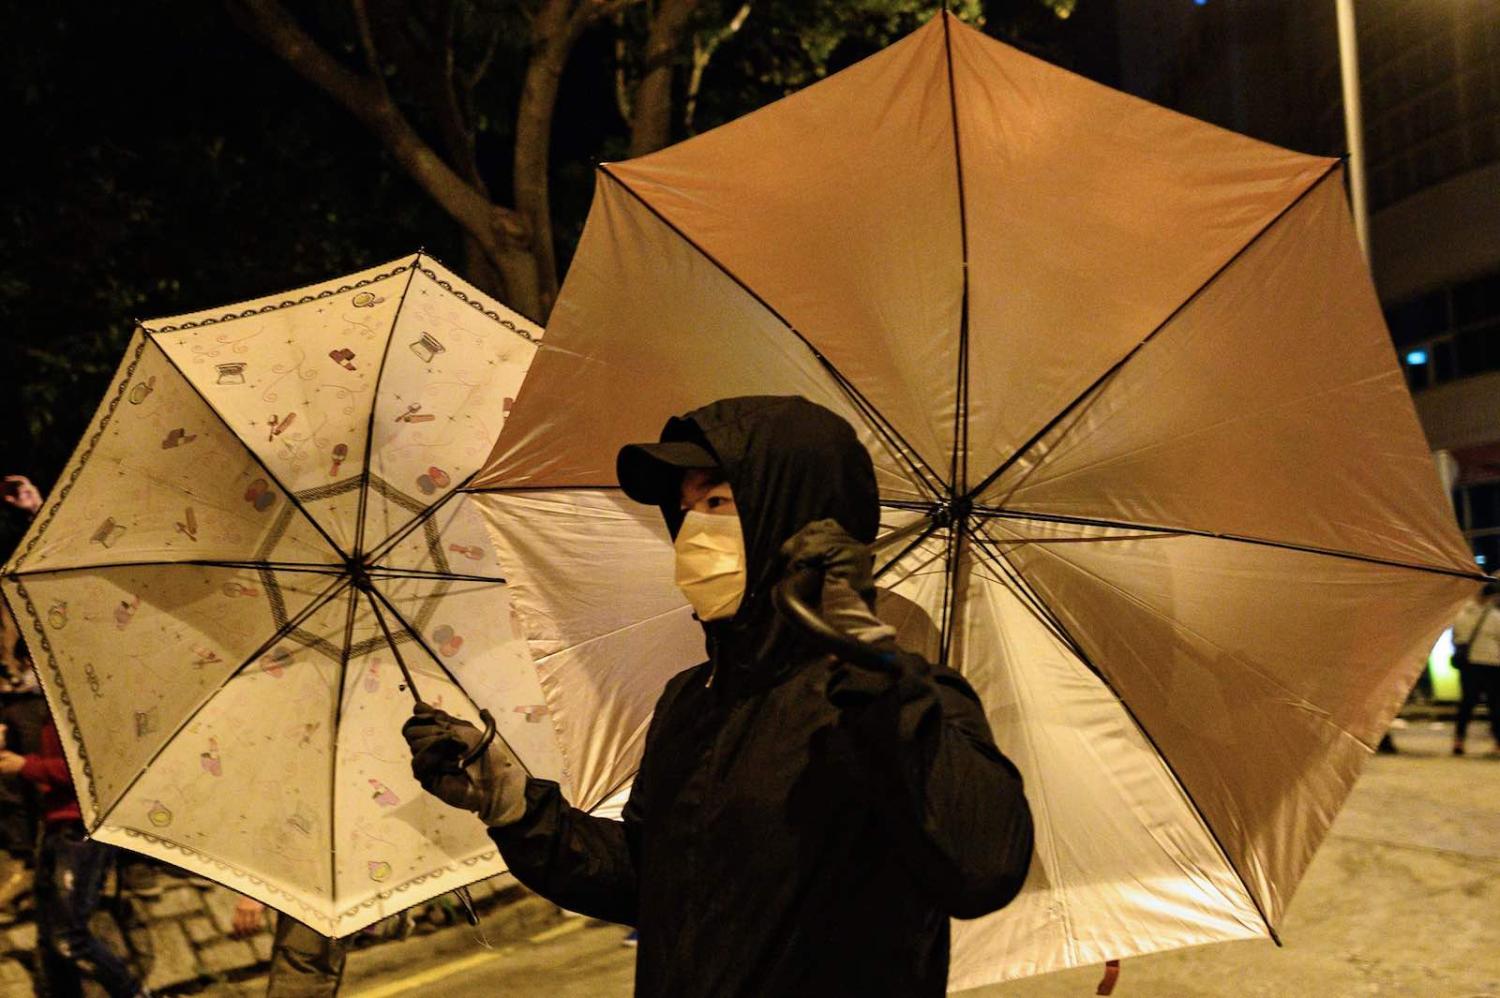 In the early weeks of the Covid-19 outbreak, Hong Kong residents protest setting up a quarantine area in their neighbourhood (Philip Fong/AFP/Getty Images)